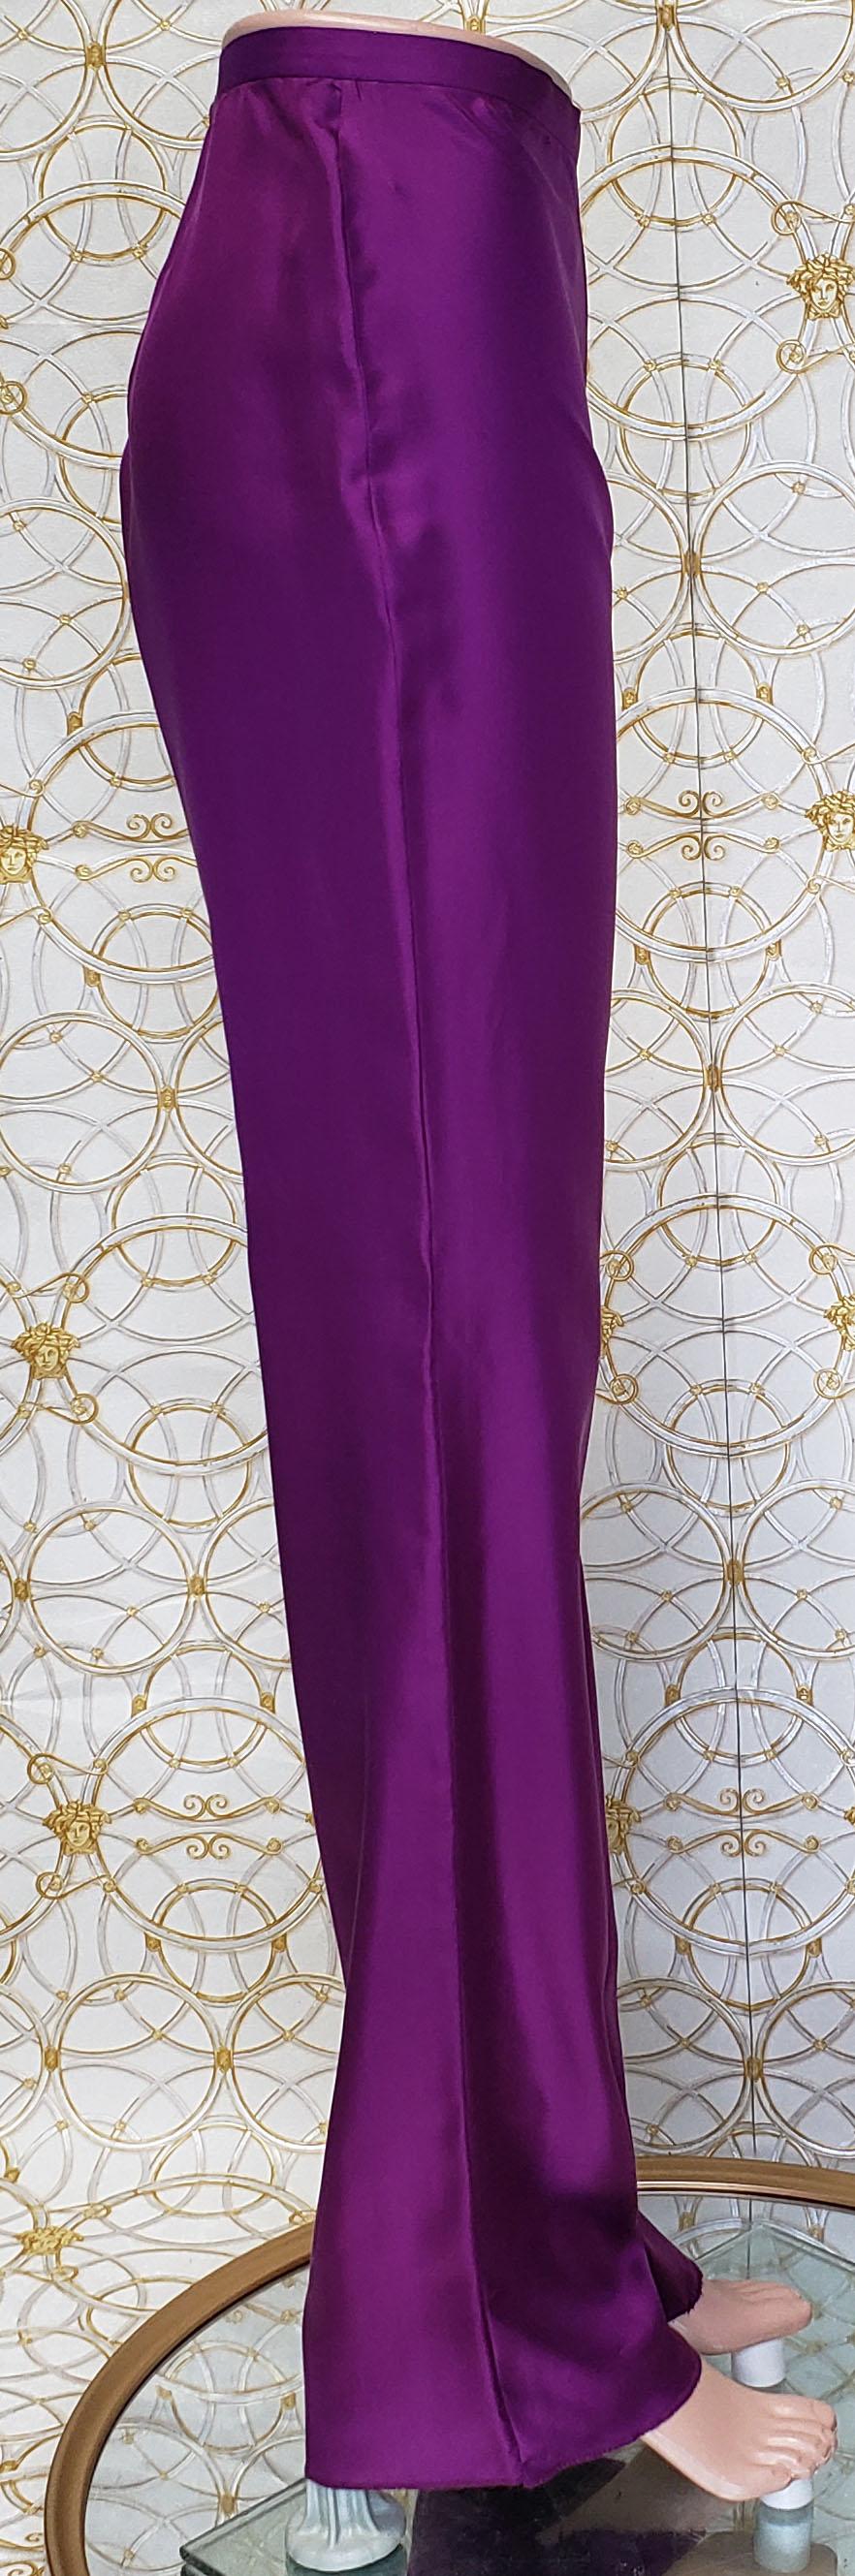 VINTAGE GIANNI VERSACE PURPLE100% SILK PANTS size 42 - 8 In New Condition For Sale In Montgomery, TX